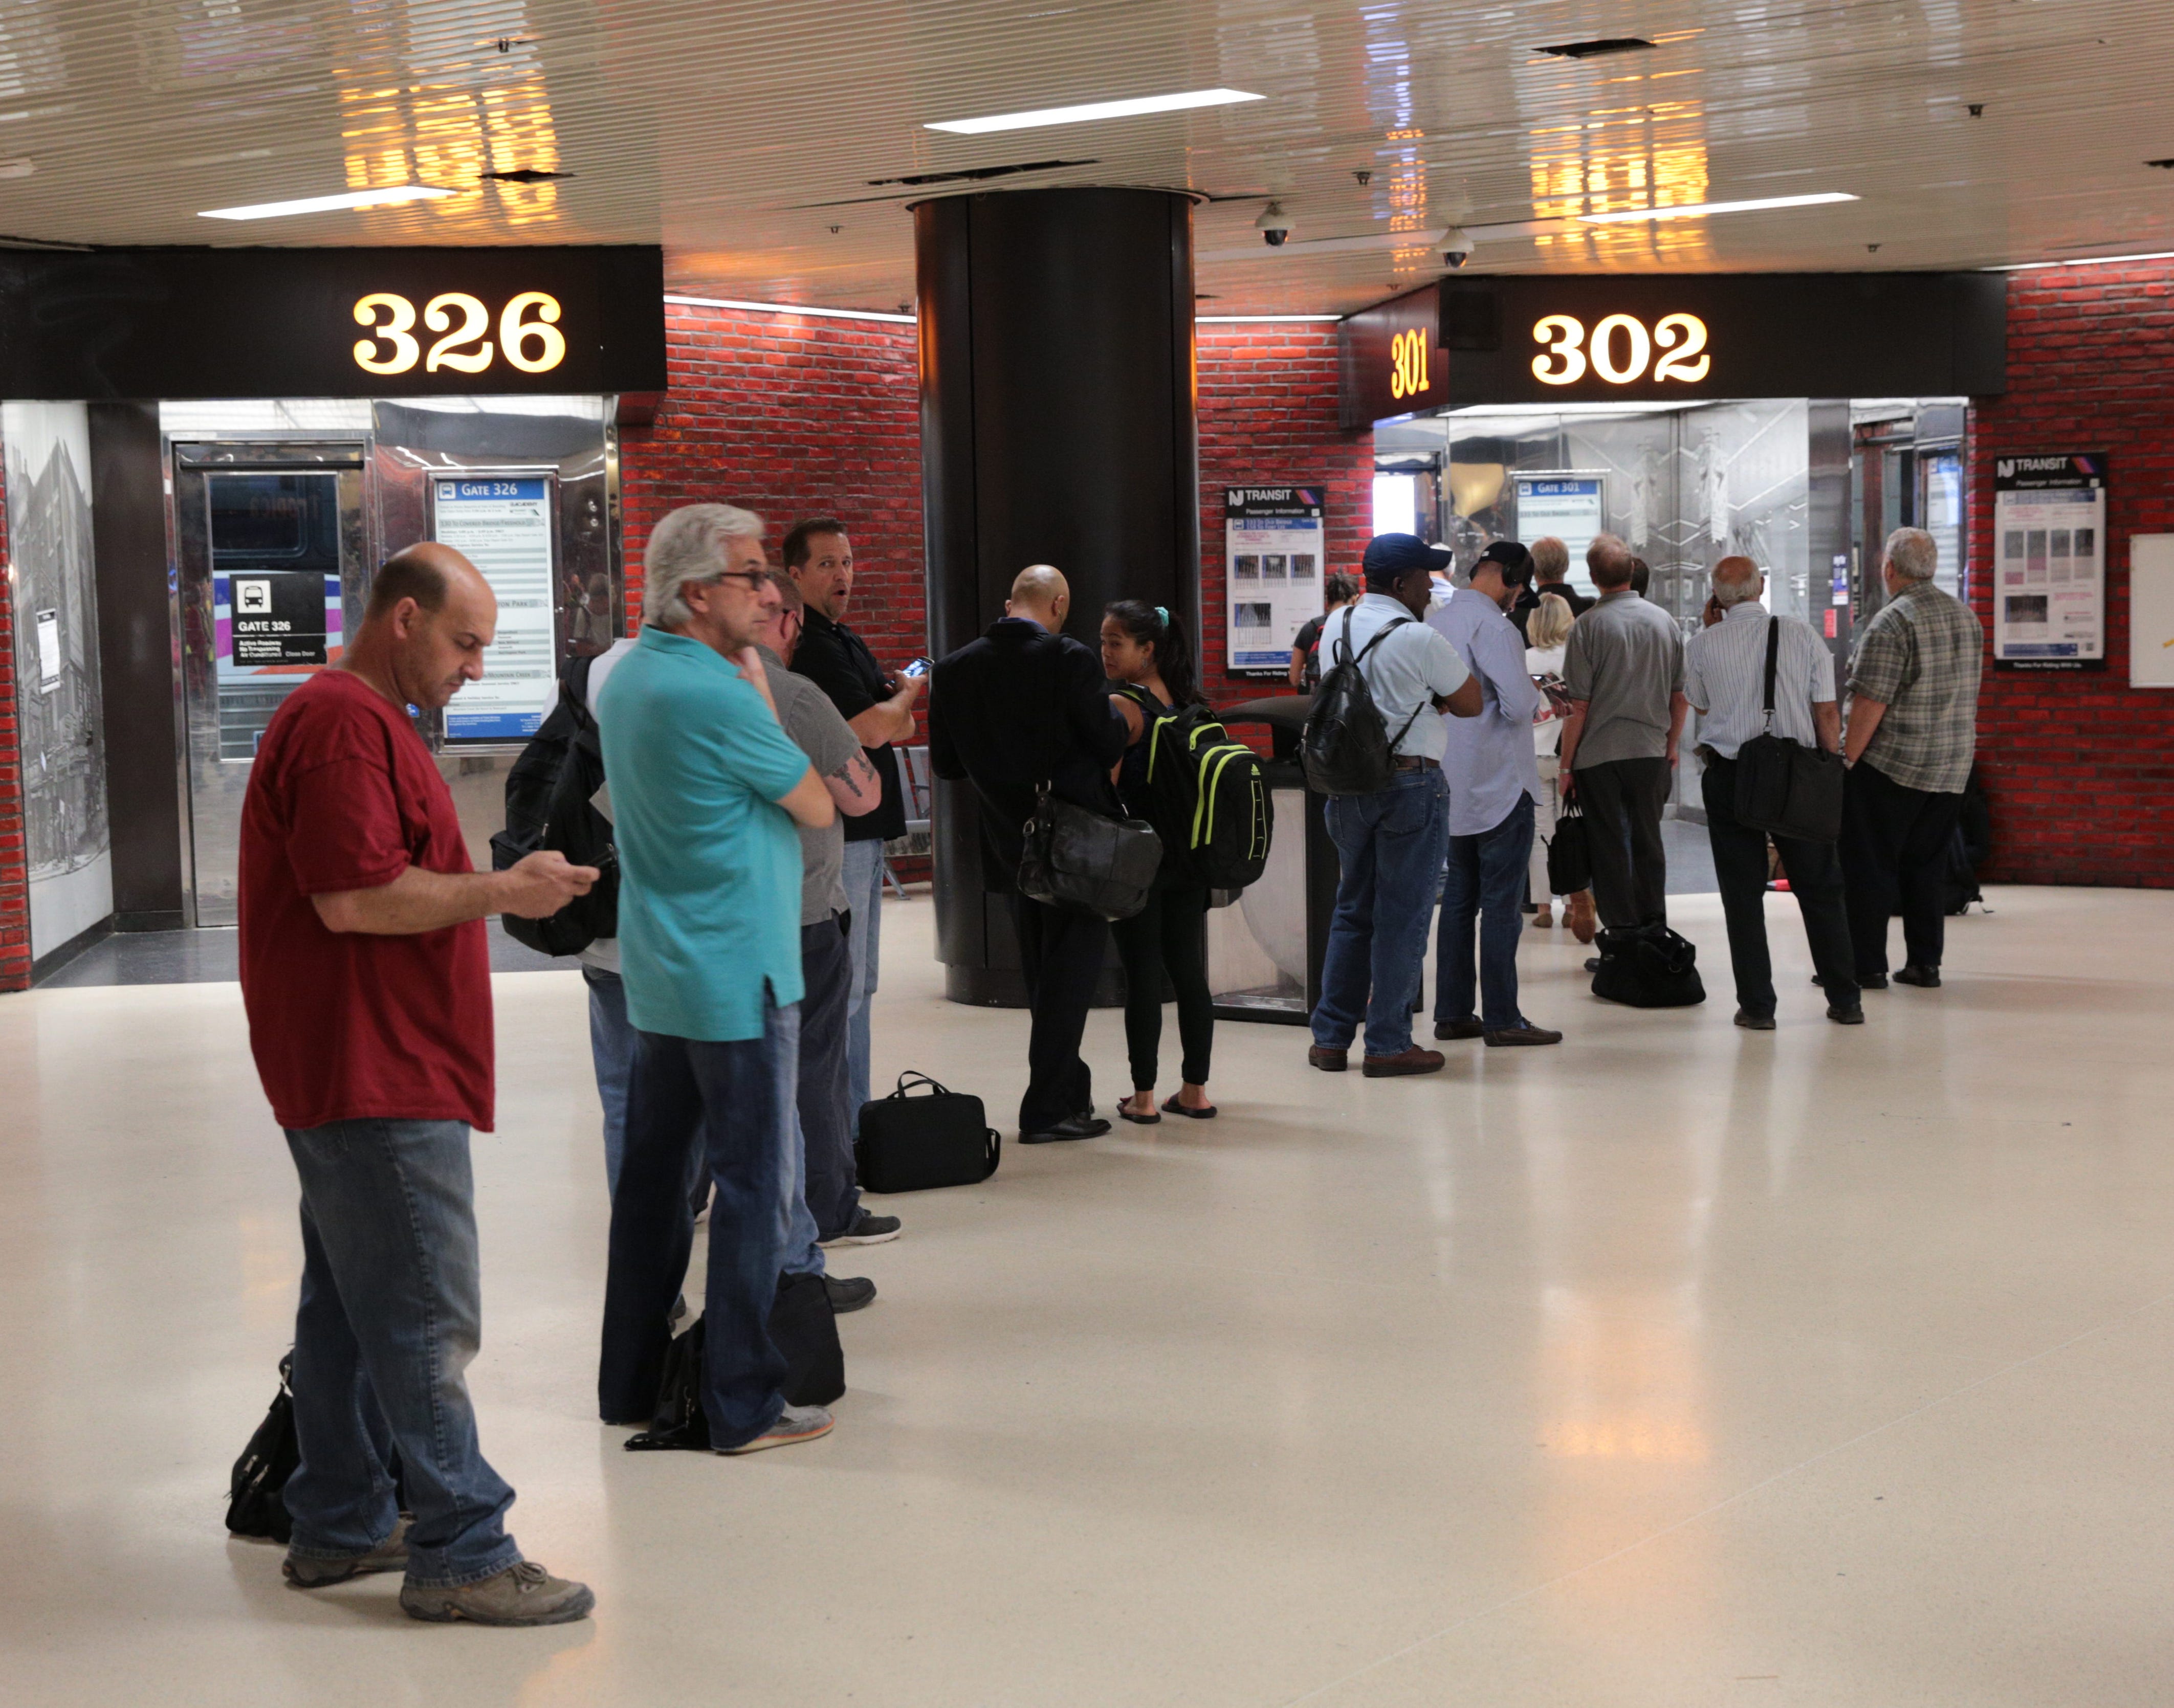 Commuters line up for a bus on the third floor at the Port Authority Bus Terminal in midtown. The Port Authority restructured departure gates in order to ease congestion during rush hour. Aug. 10, 2015.